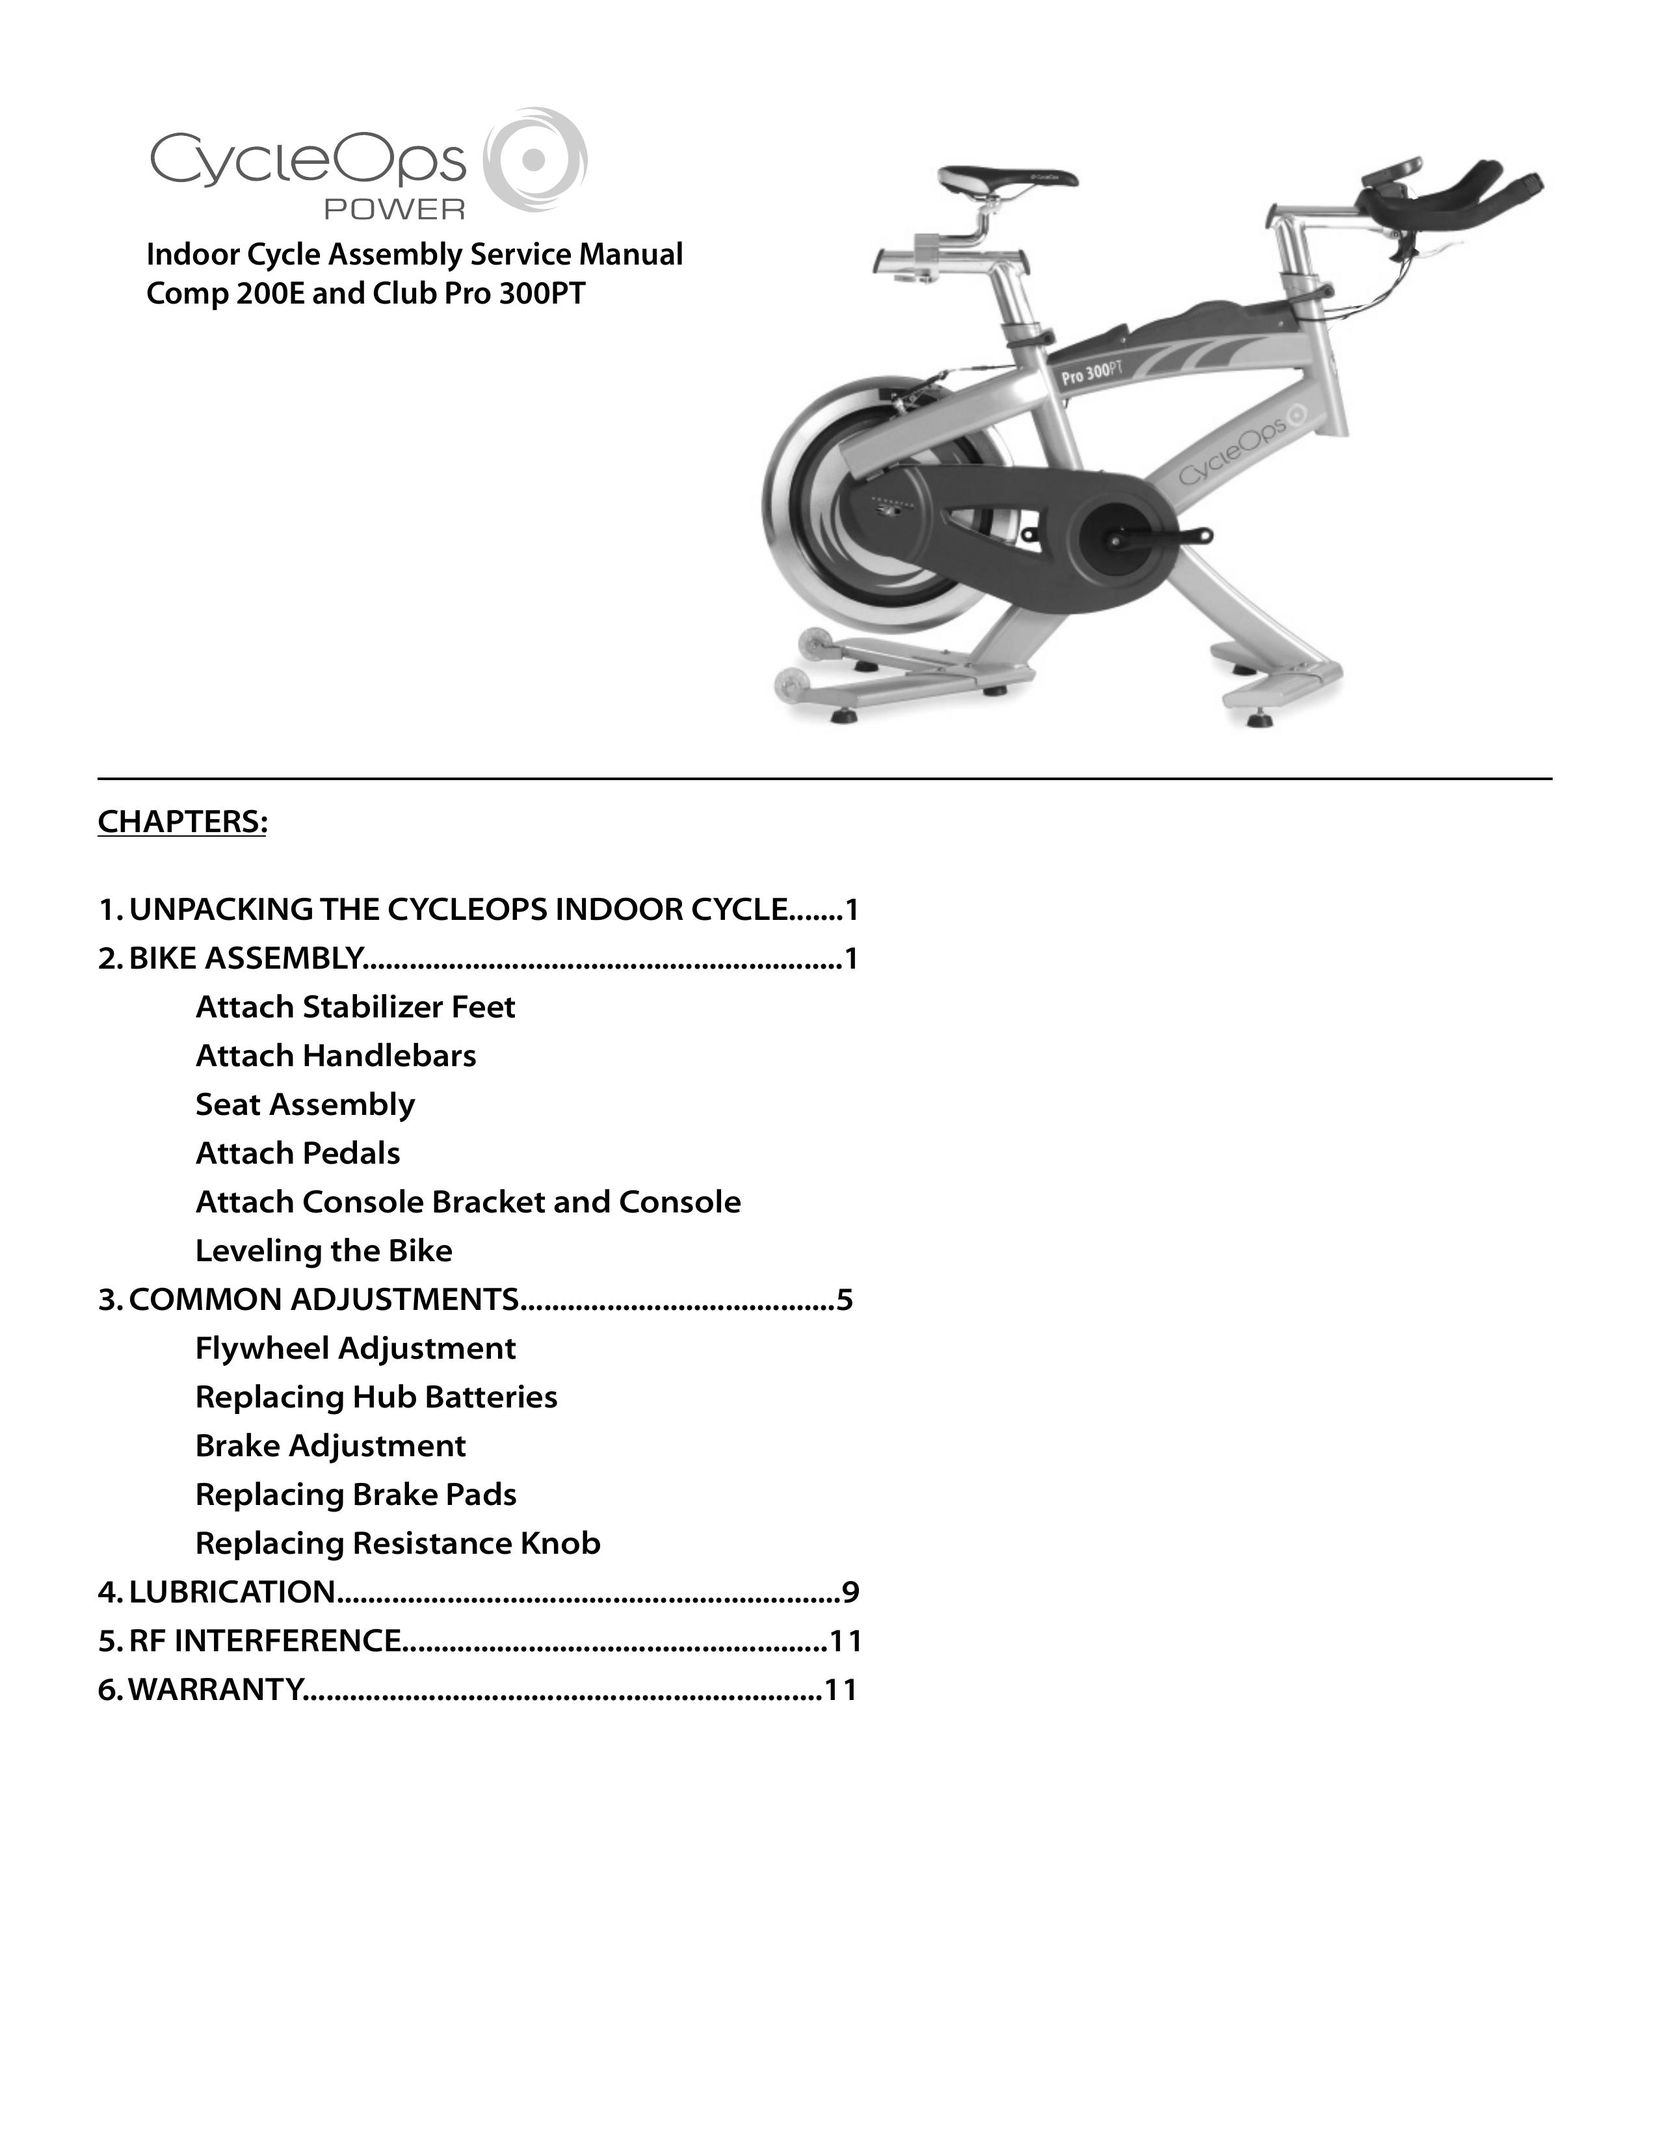 CycleOps Comp 200E Home Gym User Manual